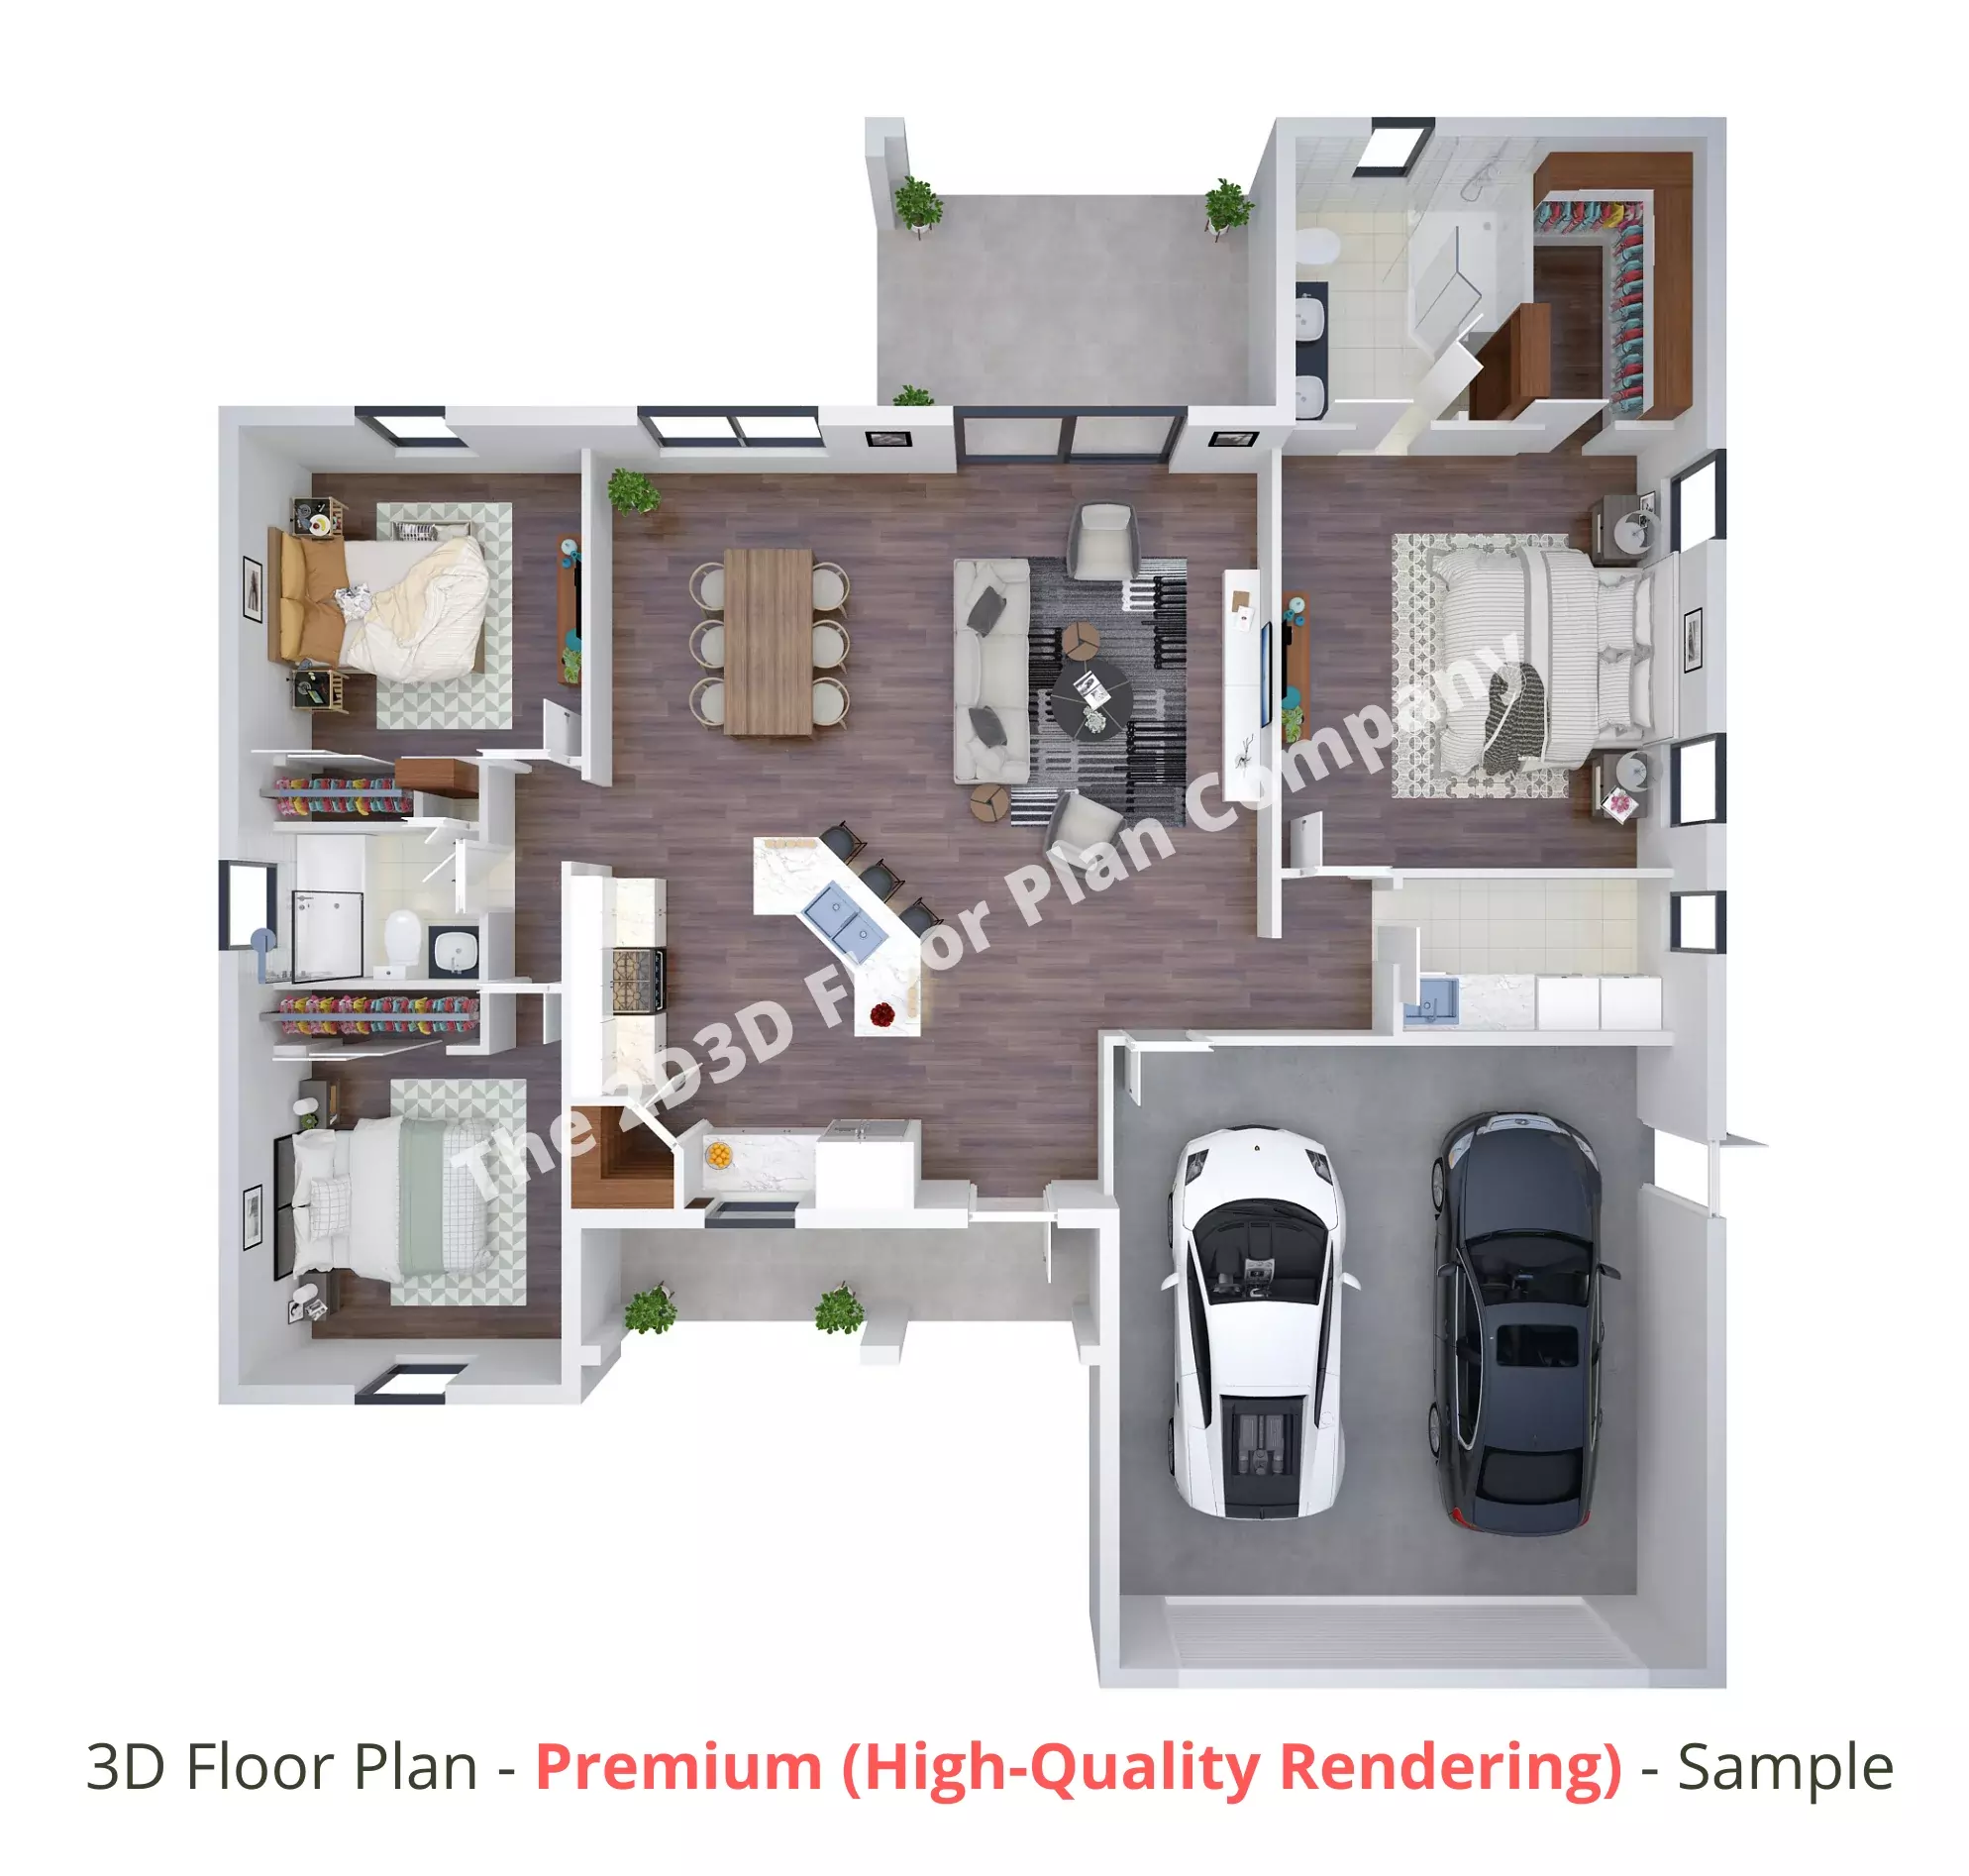 How to Convert a 2D Floor Plan Image to 3D Floor Plan (that You Can Edit)